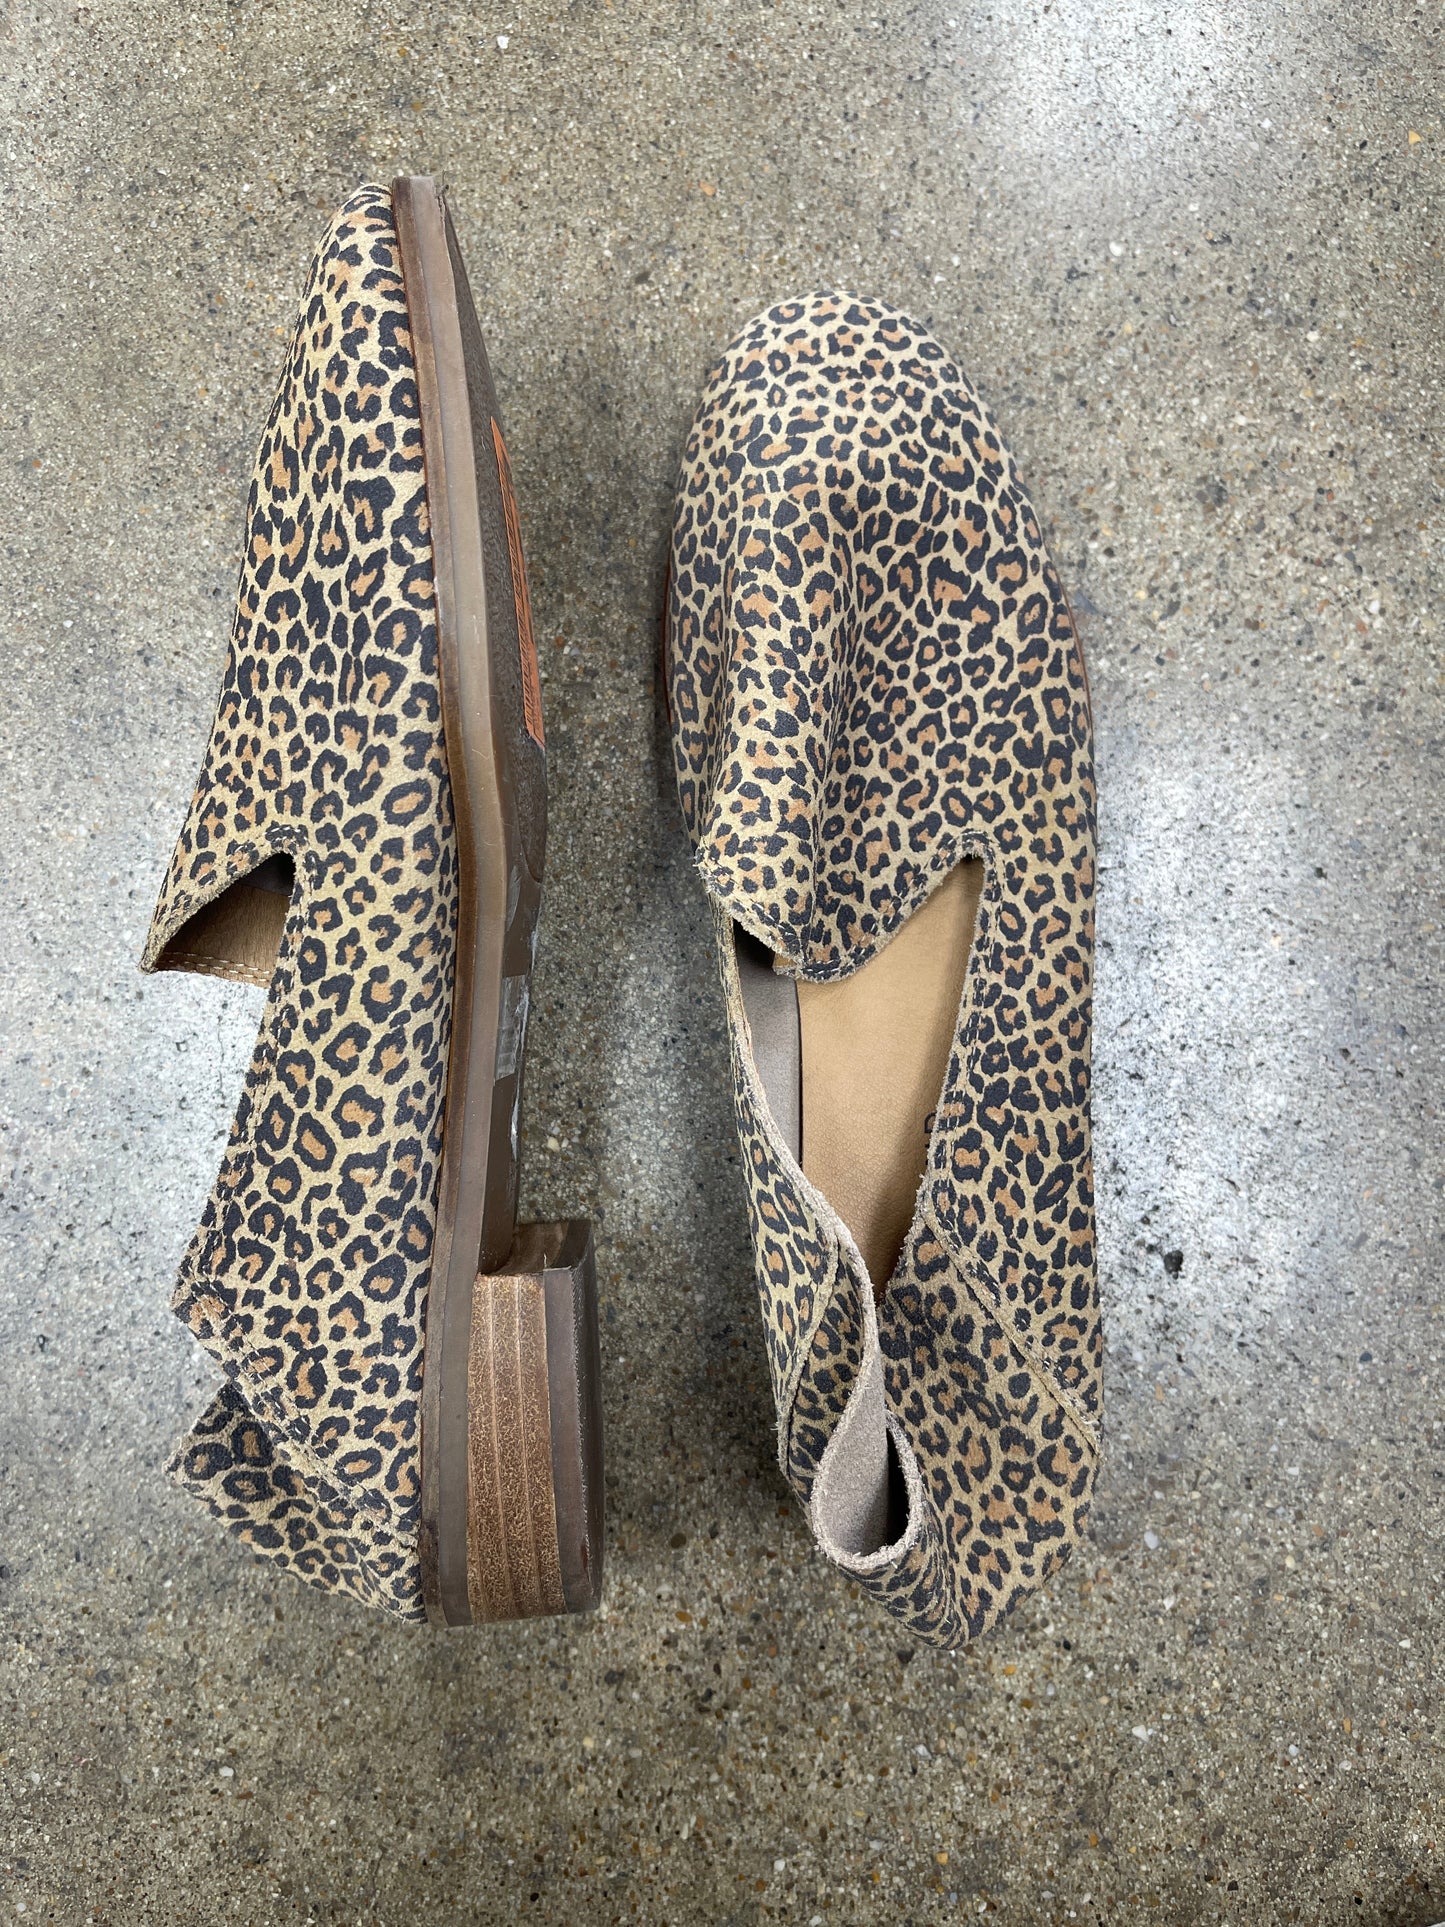 Animal Print Shoes Flats Lucky Brand, Size 9